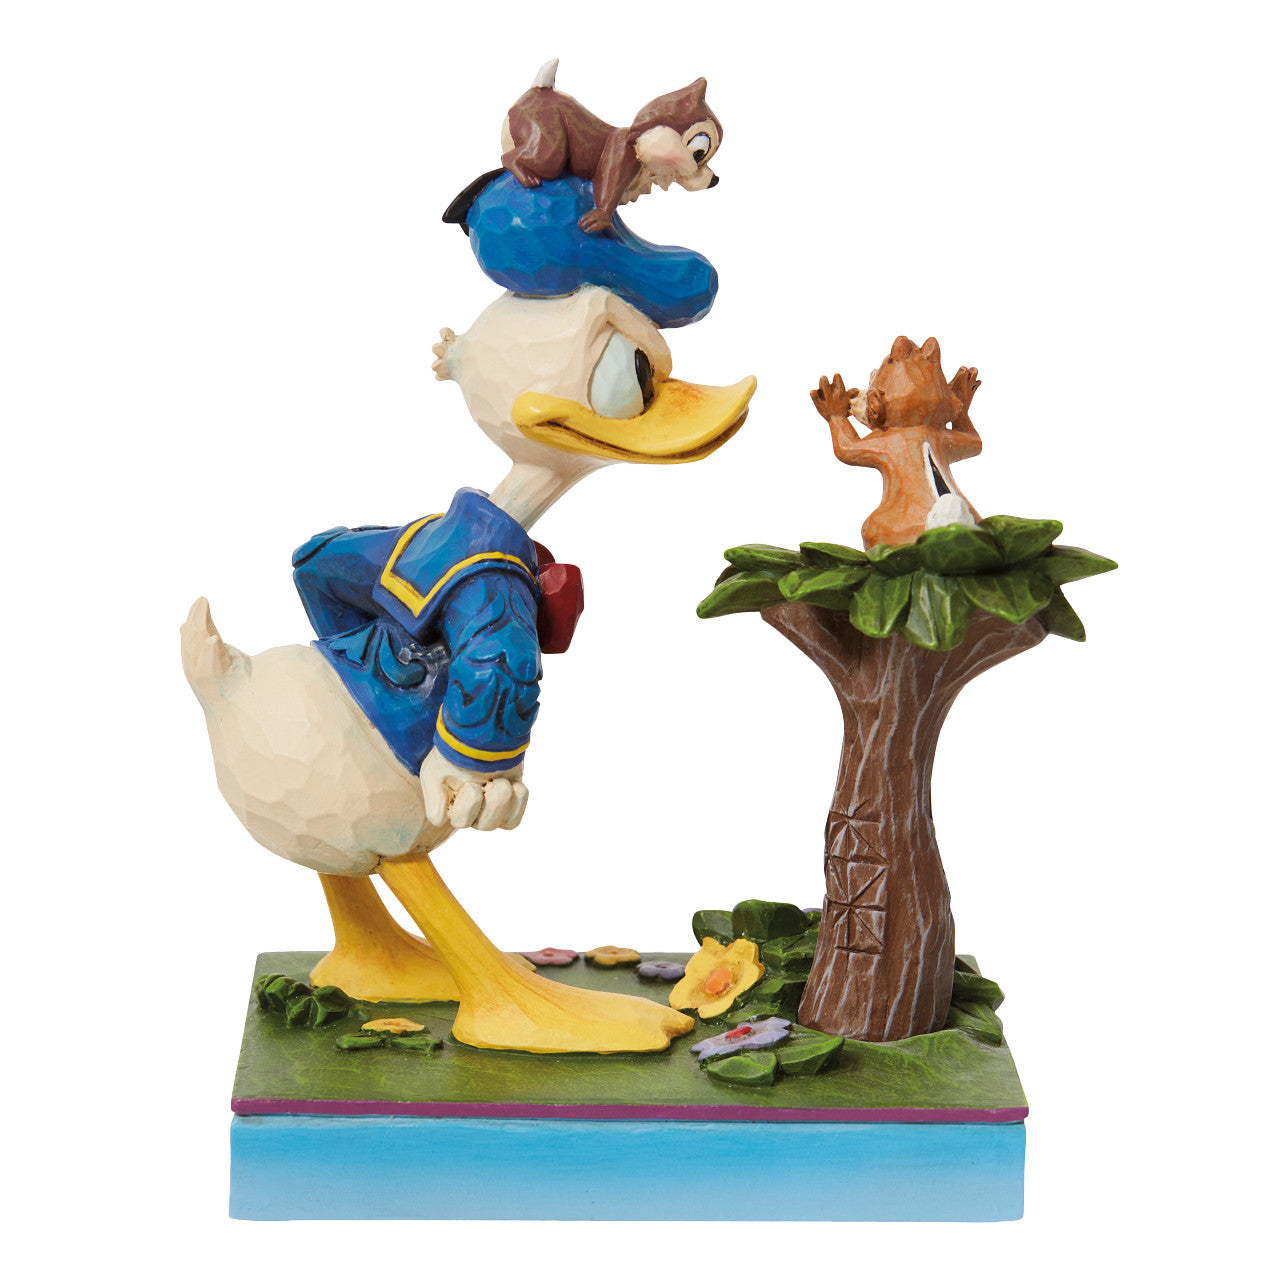 A Mischievous Pair - Donald Duck and Chip n Dale